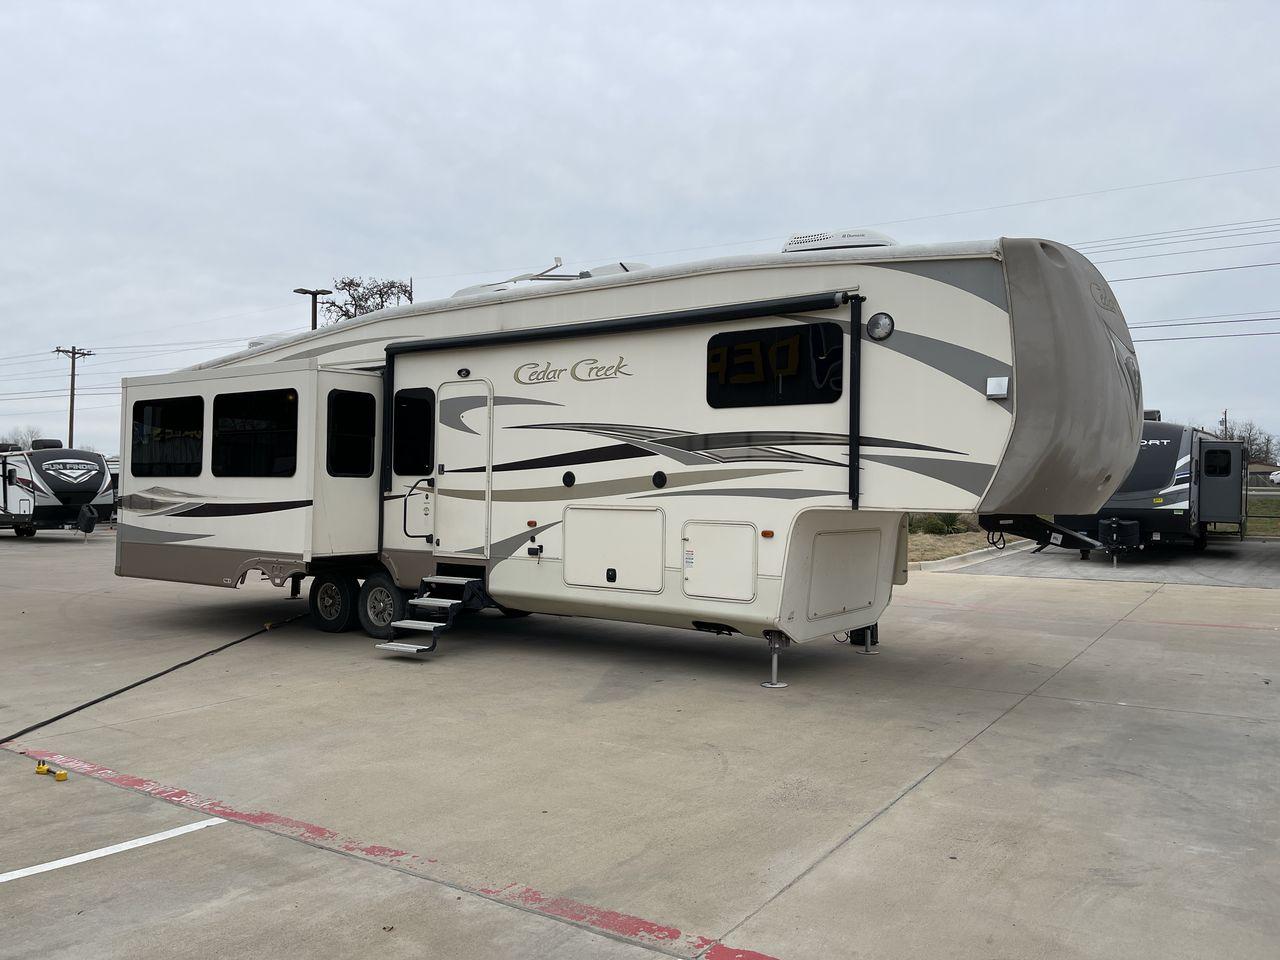 2014 TAN FOREST RIVER CEDAR CREEK 36CKTS (4X4FCRM26ES) , Length: 39.92 ft. | Dry Weight: 12,076 lbs. | Gross Weight: 16,389 lbs. | Slides: 3 transmission, located at 4319 N Main St, Cleburne, TX, 76033, (817) 678-5133, 32.385960, -97.391212 - This 2014 Forest River Cedar Creek 36CKTS Fifth Wheel measures just shy of 40 feet long and 8 feet wide. This model has a GVWR of 16,389 and a hitch weight of 2,389 lbs. This unit is equipped with heating rated at 40,000 BTUs, and cooling rated at 15,000 BTUs, meaning it will always be exactly the t - Photo #24